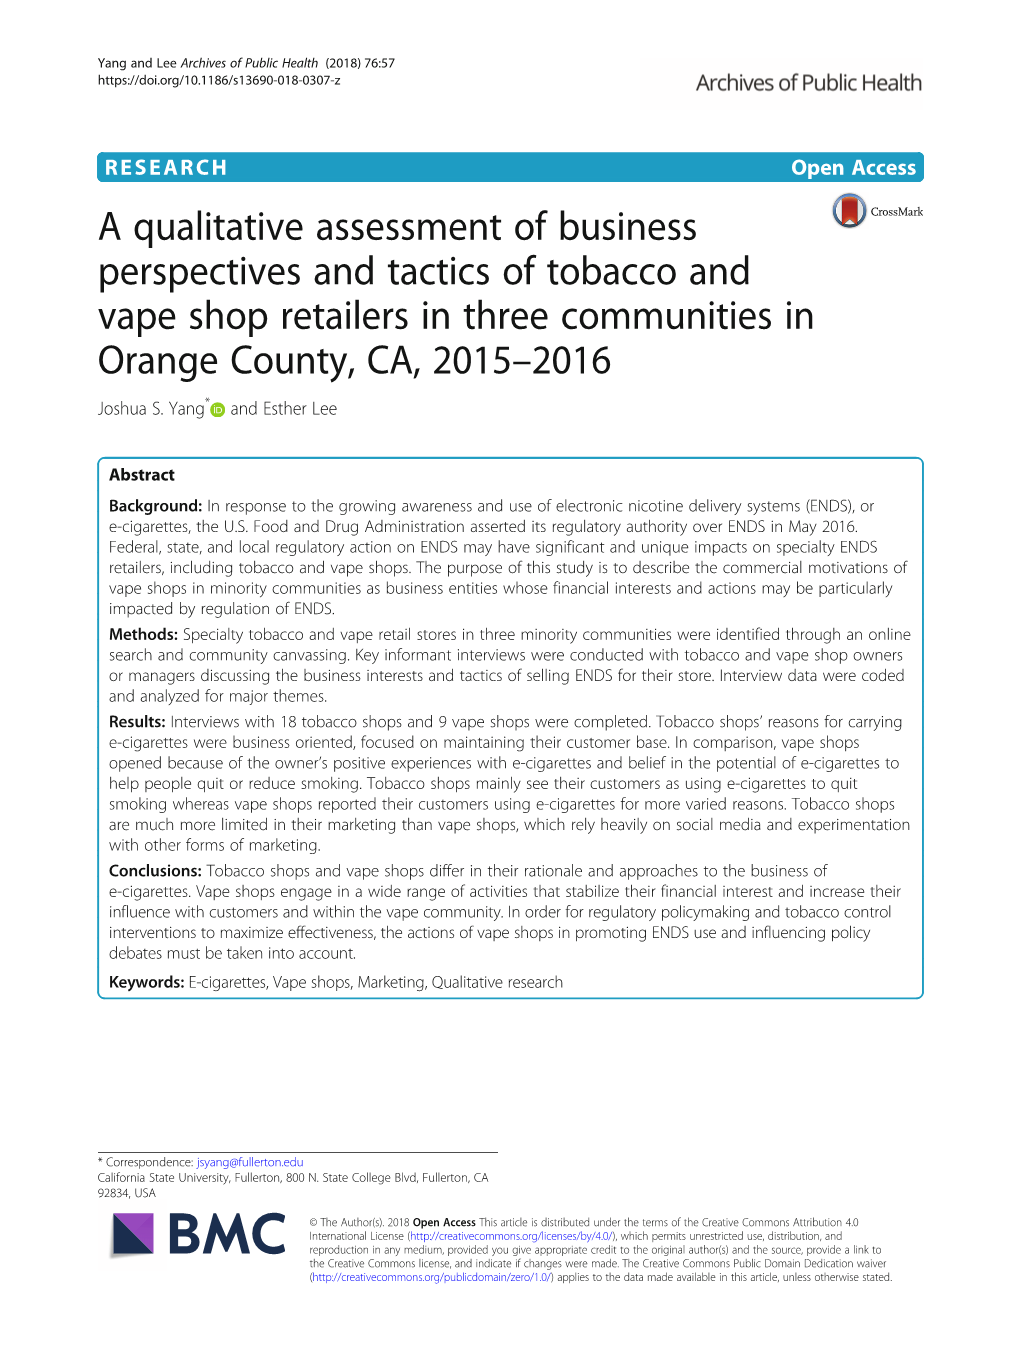 A Qualitative Assessment of Business Perspectives and Tactics of Tobacco and Vape Shop Retailers in Three Communities in Orange County, CA, 2015–2016 Joshua S